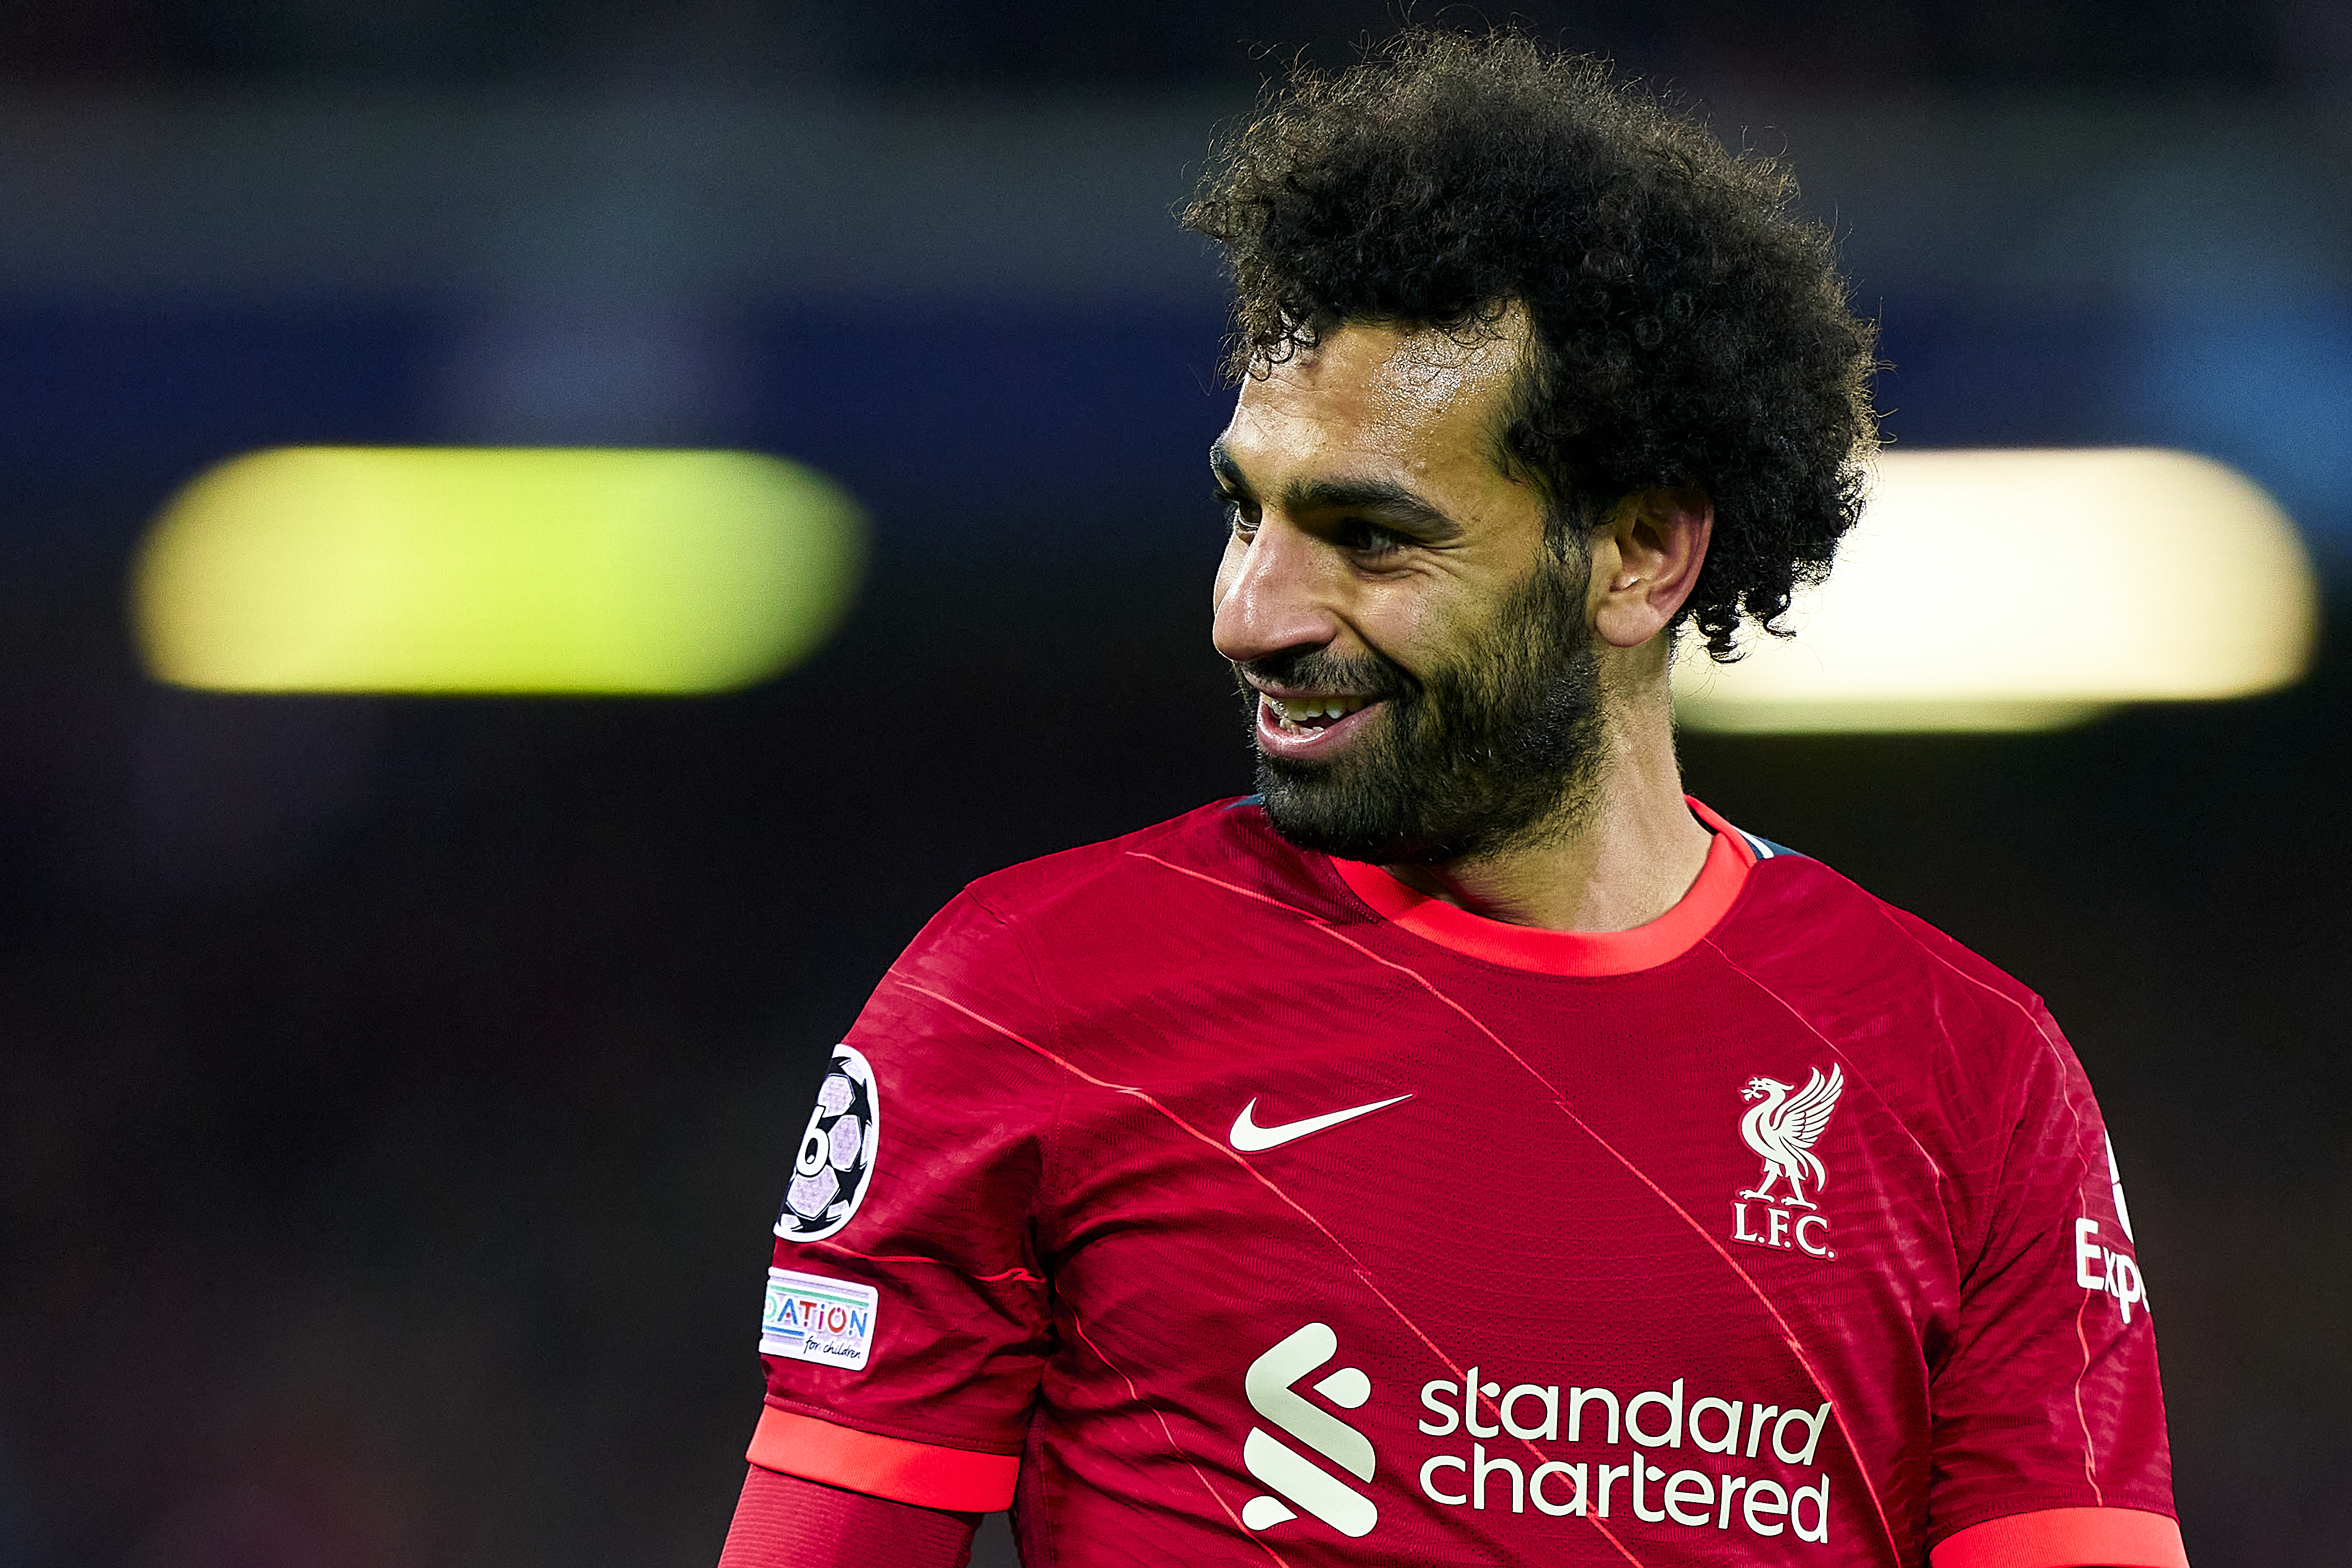 Mohamed Salah of Liverpool FC looks on during the UEFA Champions League group B match between Liverpool FC and Atletico Madrid at Anfield on November 03, 2021 in Liverpool, England.